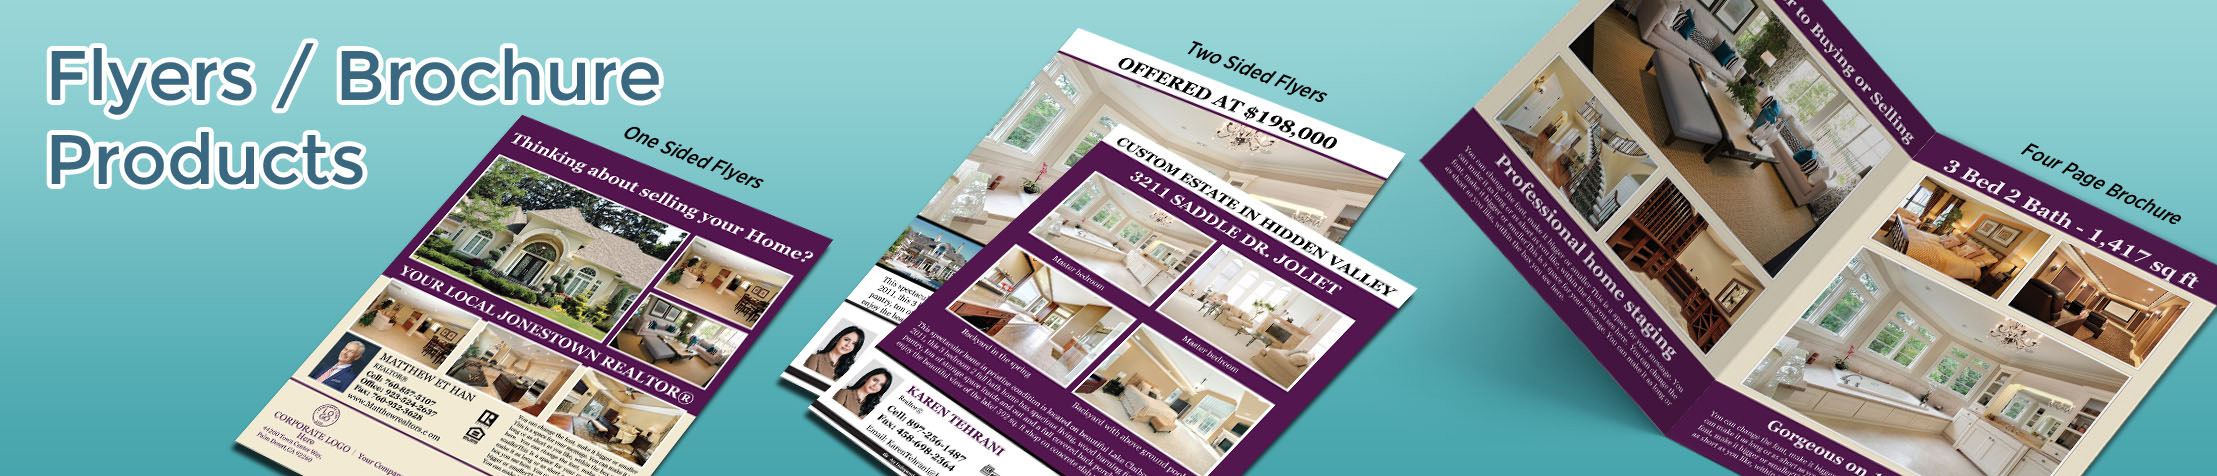 Berkshire Hathaway Real Estate Flyers and Brochures - Berkshire Hathaway flyer and brochure templates for open houses and marketing | BestPrintBuy.com